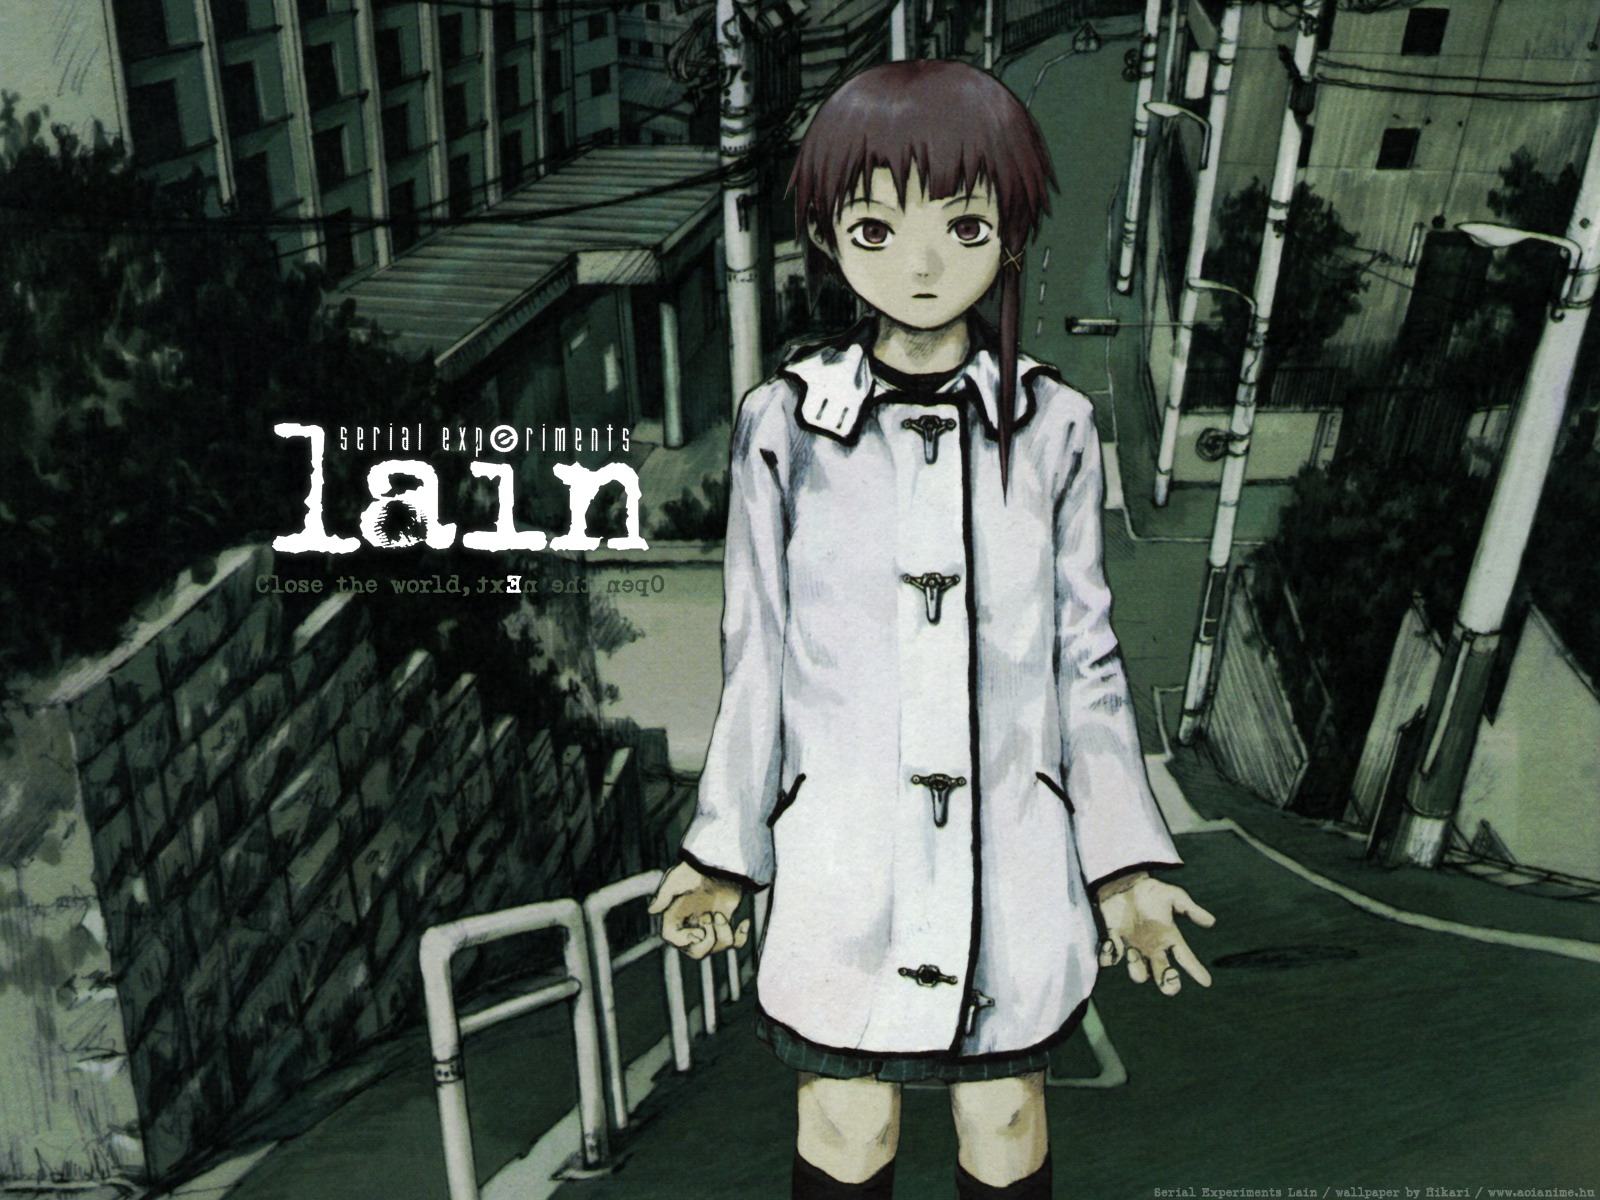 Serial Experiments Lain Dadwatchesanime